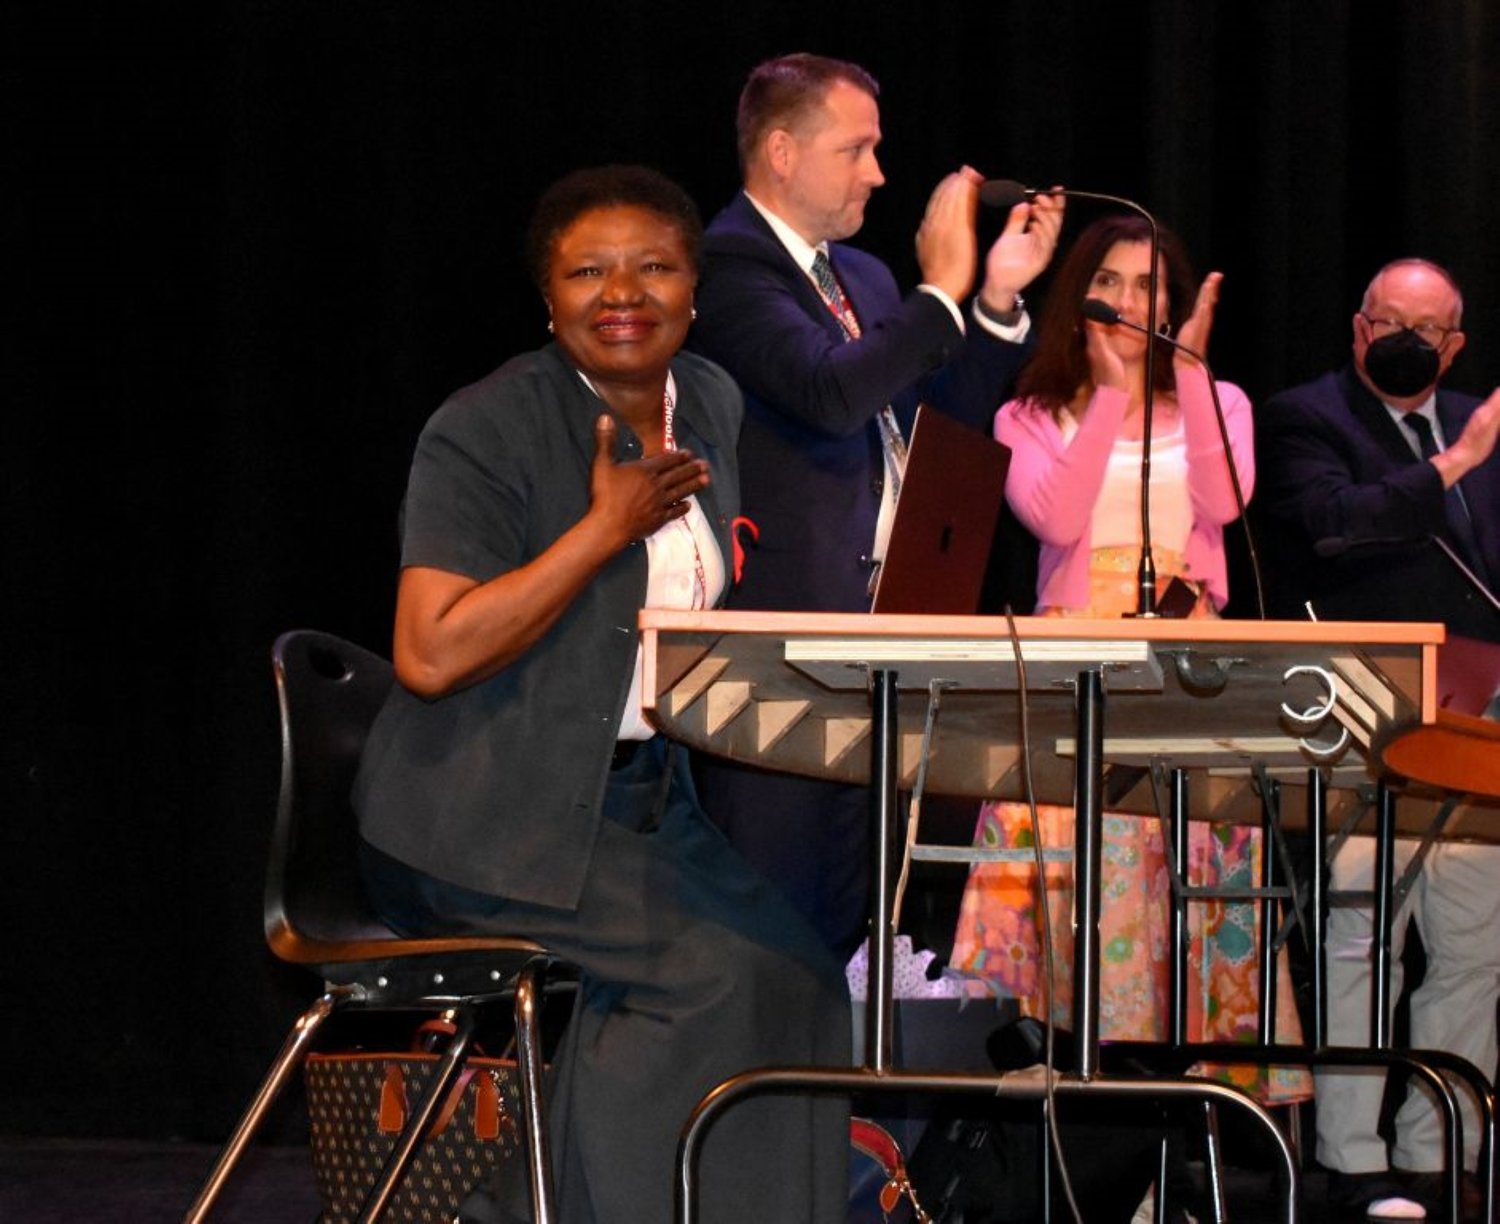 Olivia Buatsi was thanked for her 25 years of cumulative service at North Shore School District along with other teachers and administrators at the Tenure and Retirement Recognition meeting on June 8.